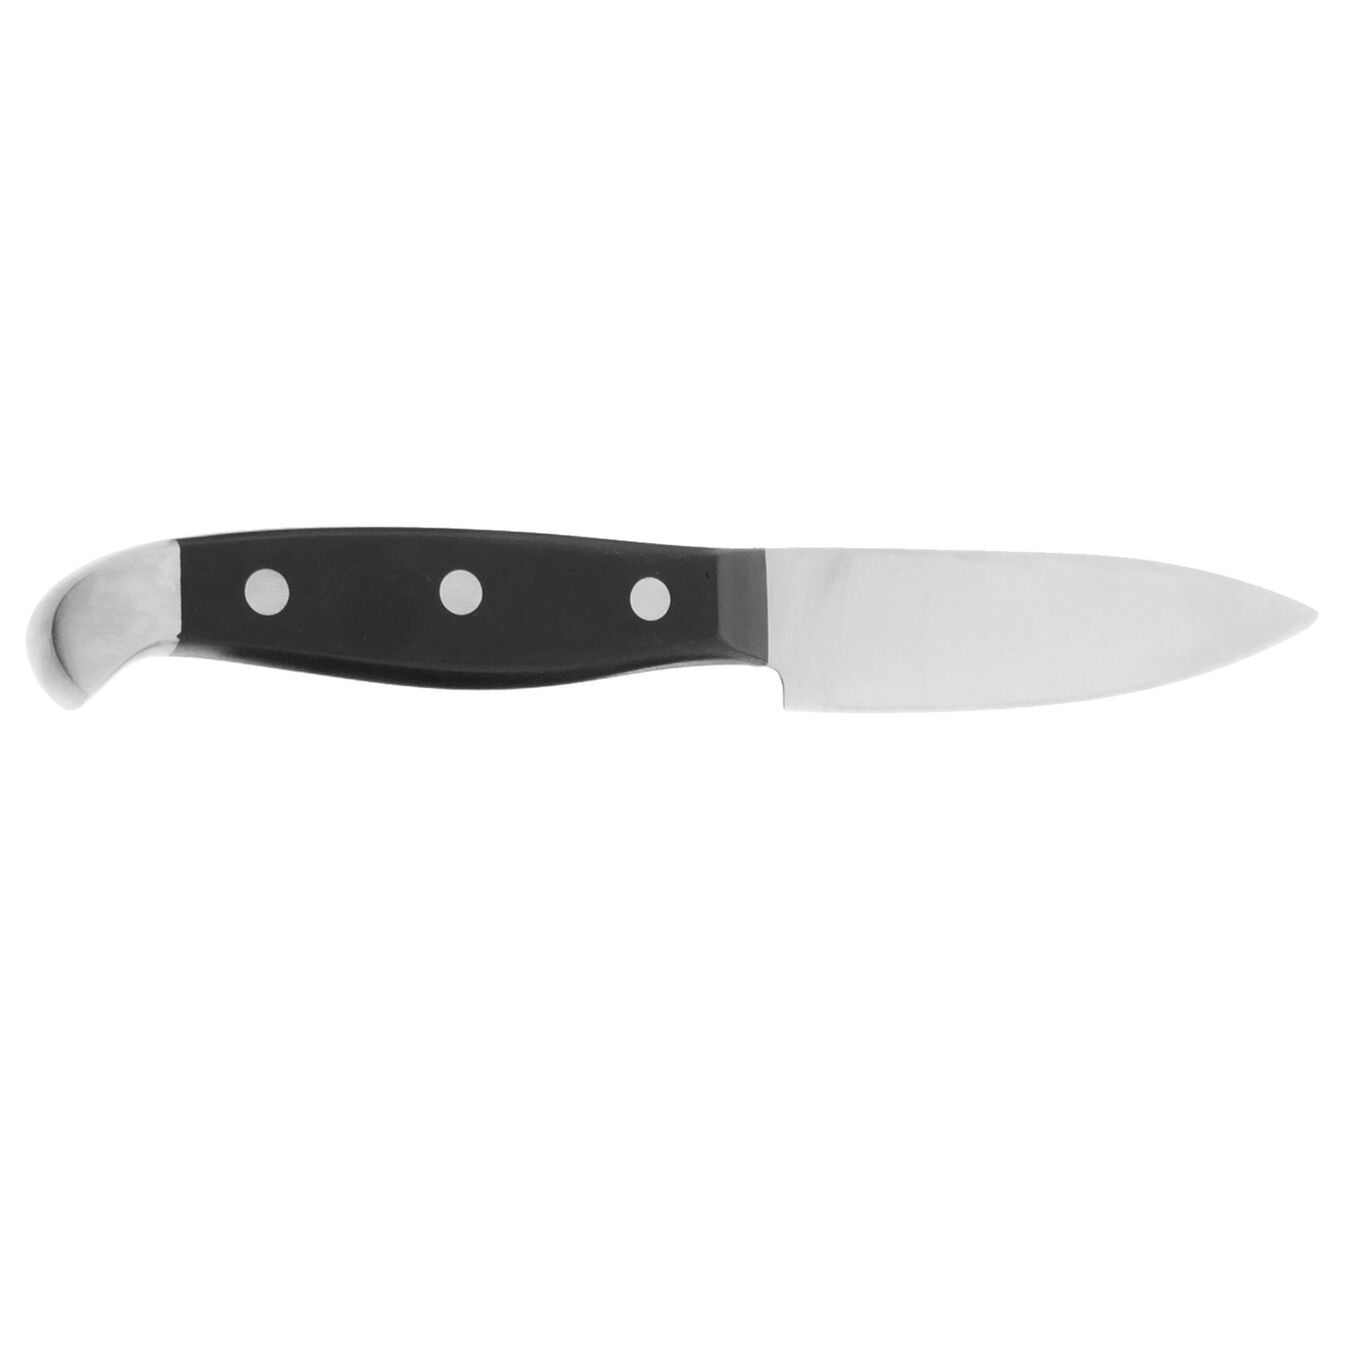 3-inch, Paring knife,,large 2